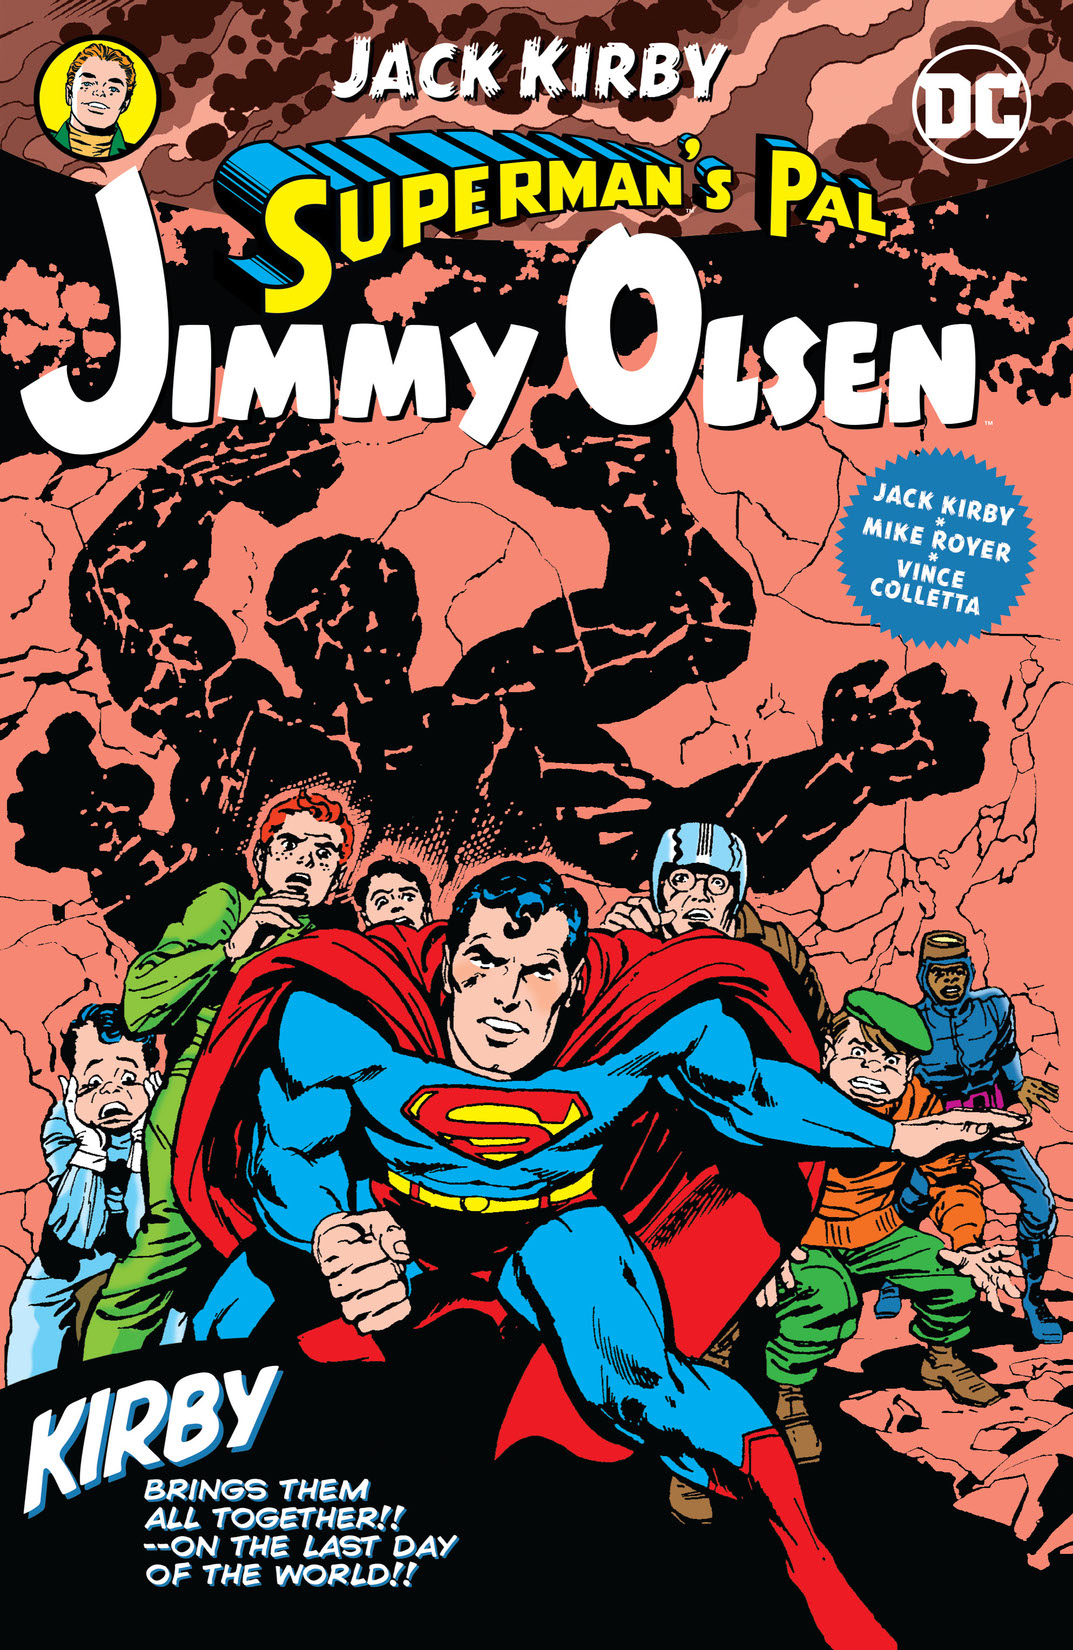 Superman's Pal, Jimmy Olsen by Jack Kirby preview images